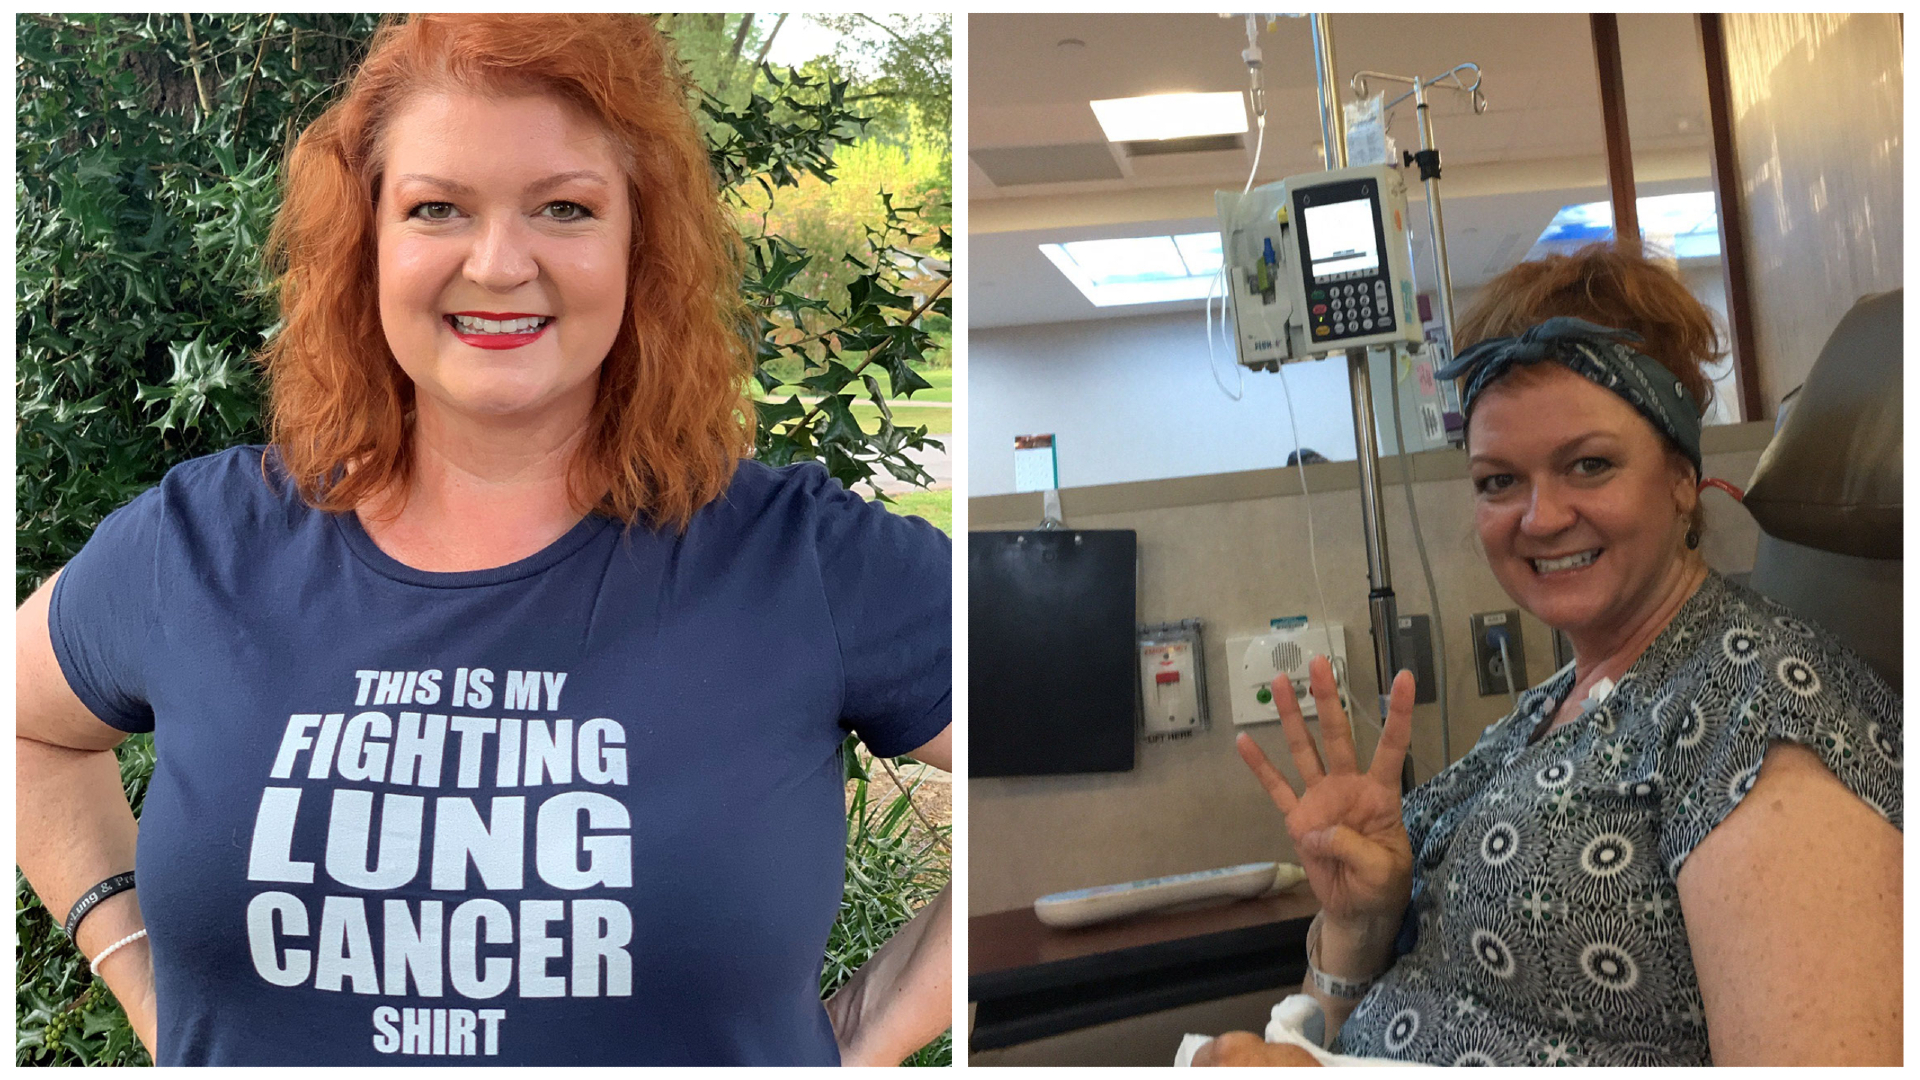 A nonsmoker diagnosed with lung cancer, Paige Black endured a worsening condition until her tumor grew and her doctor took advantage to uncover a treatment.